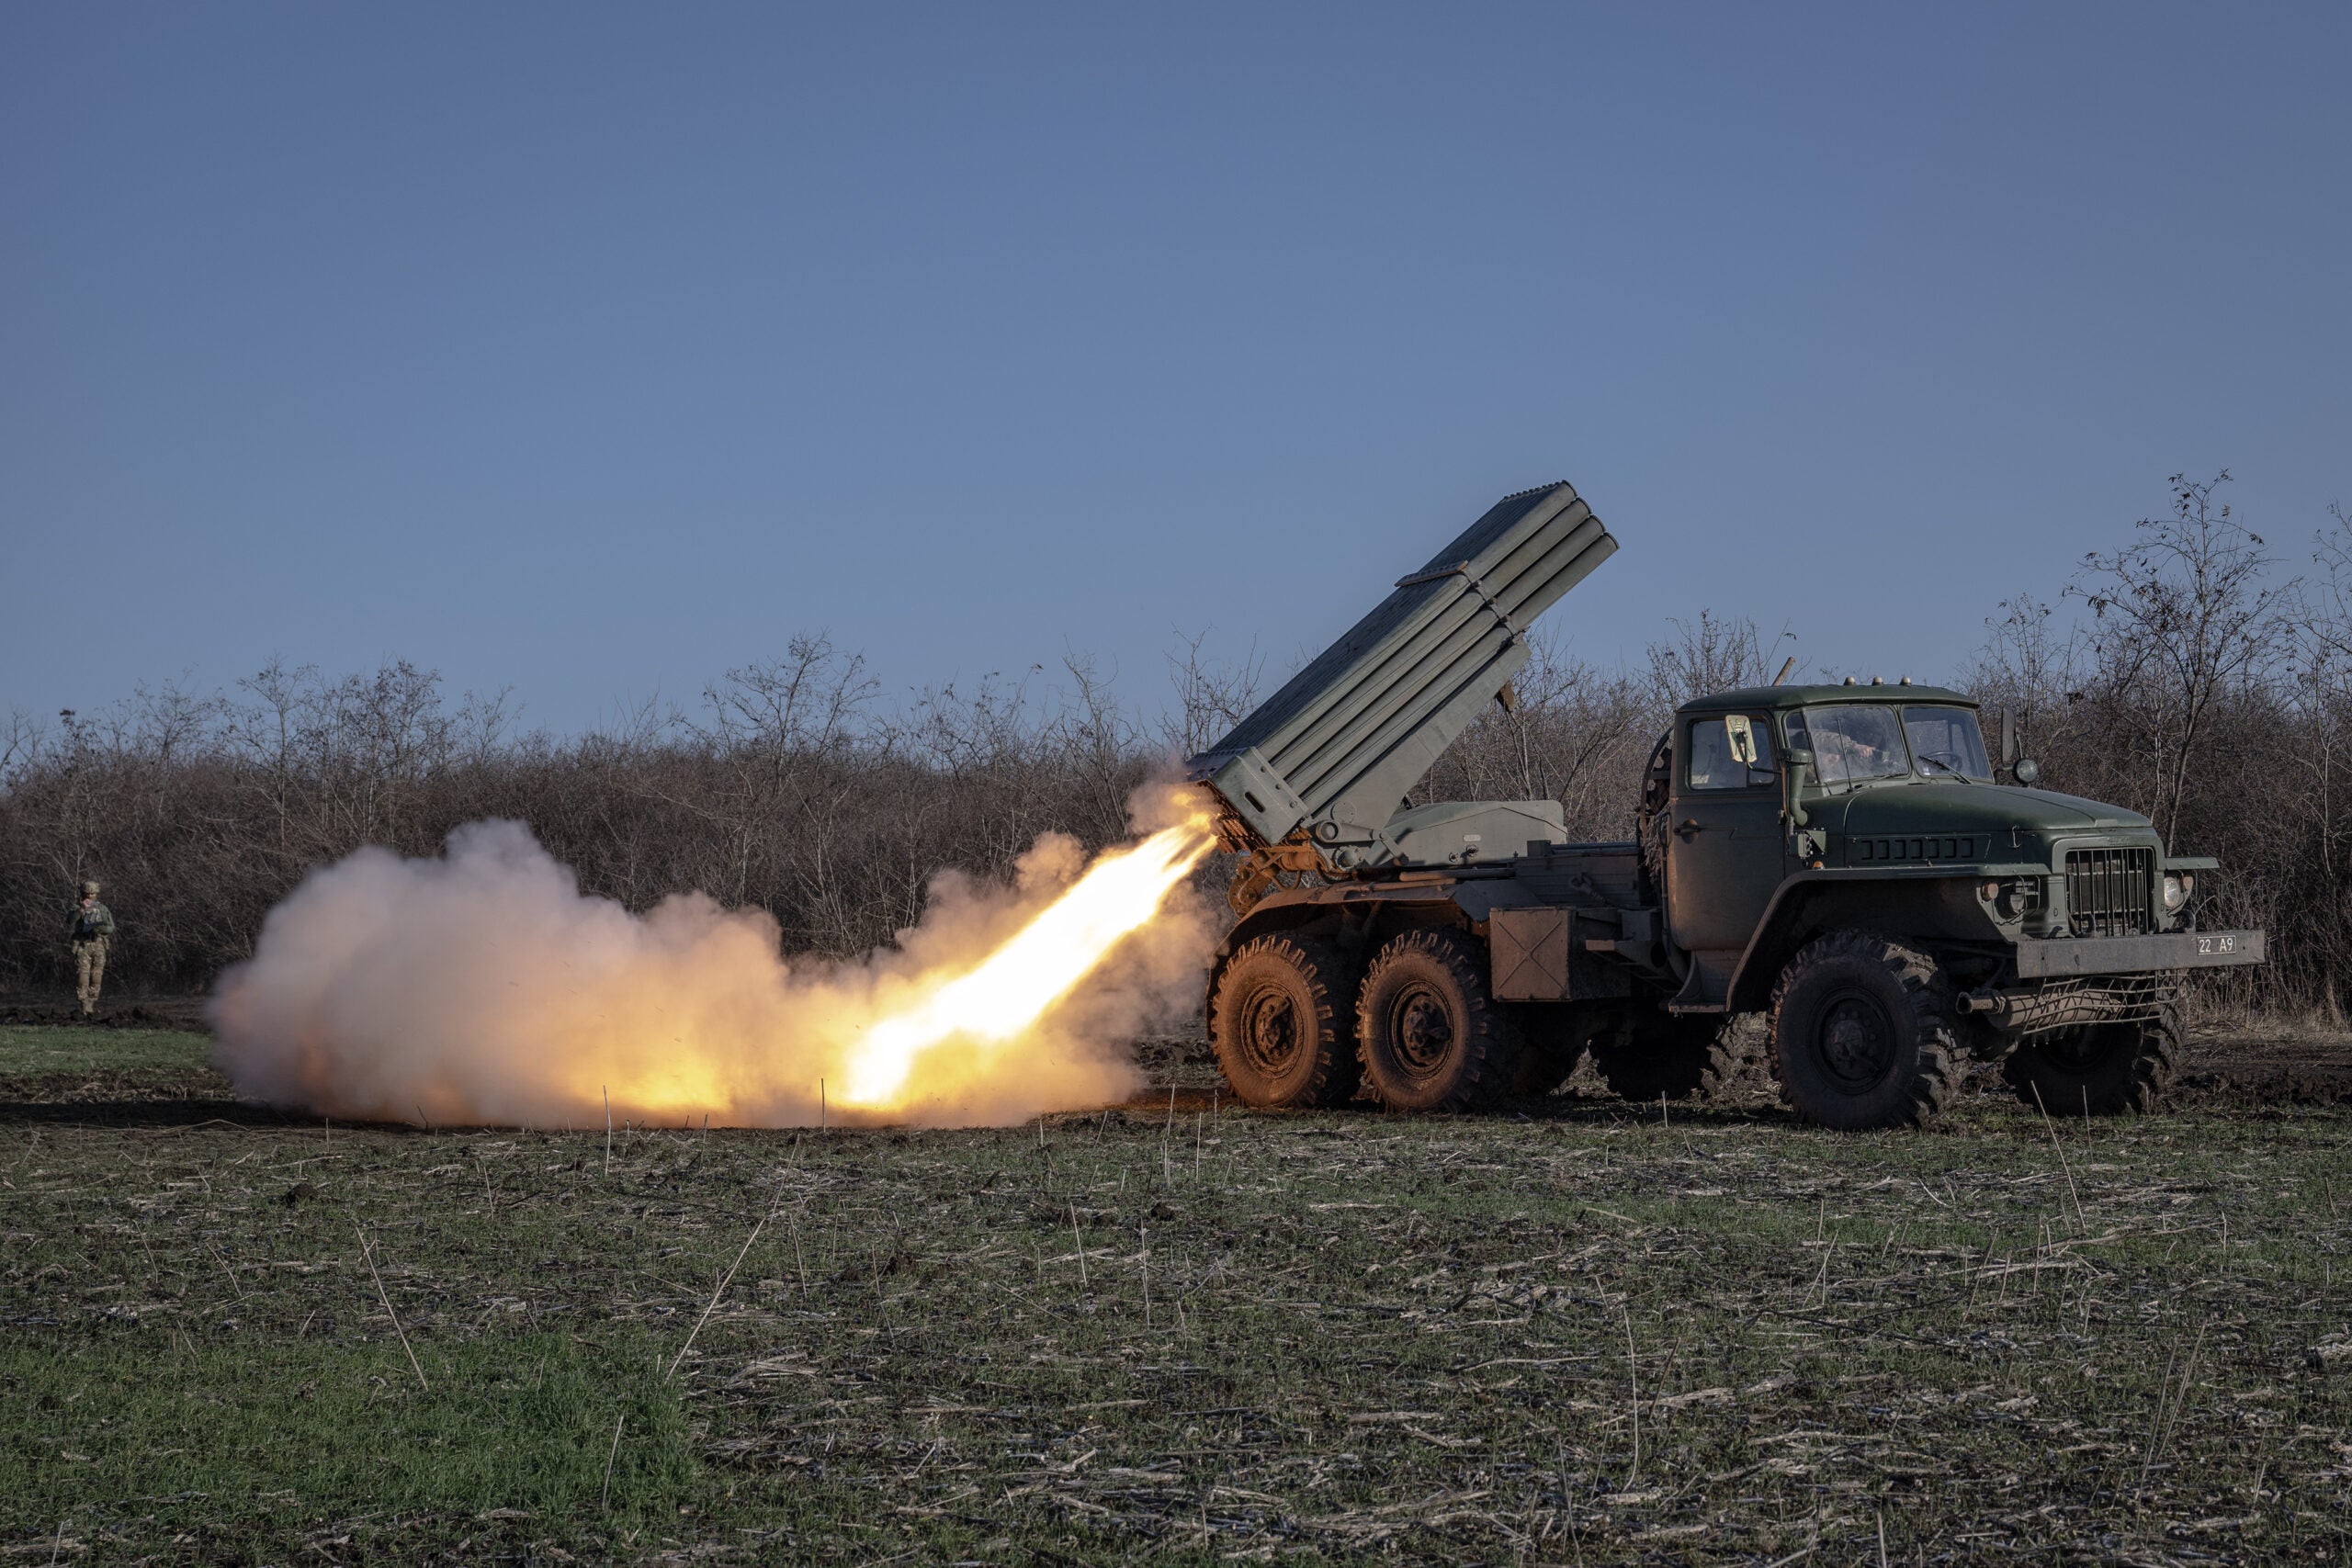 AVDIIVKA, UKRAINE - NOVEMBER 28: Ukrainian soldiers fire artillery at their fighting position in the direction of Avdiivka of Donetsk Oblast, Ukraine on November 28, 2023. Ukrainian artillery units deployed in the Avdiivka direction, where heavy clashes have been continuing due to the intensification of Russian attacks lately, continue their intense firing activities. Trying to repel the attacks of Russian troops, the Ukrainian army defends the frontlines by continuing its air and land shooting activities. (Photo by Ozge Elif Kizil/Anadolu via Getty Images)